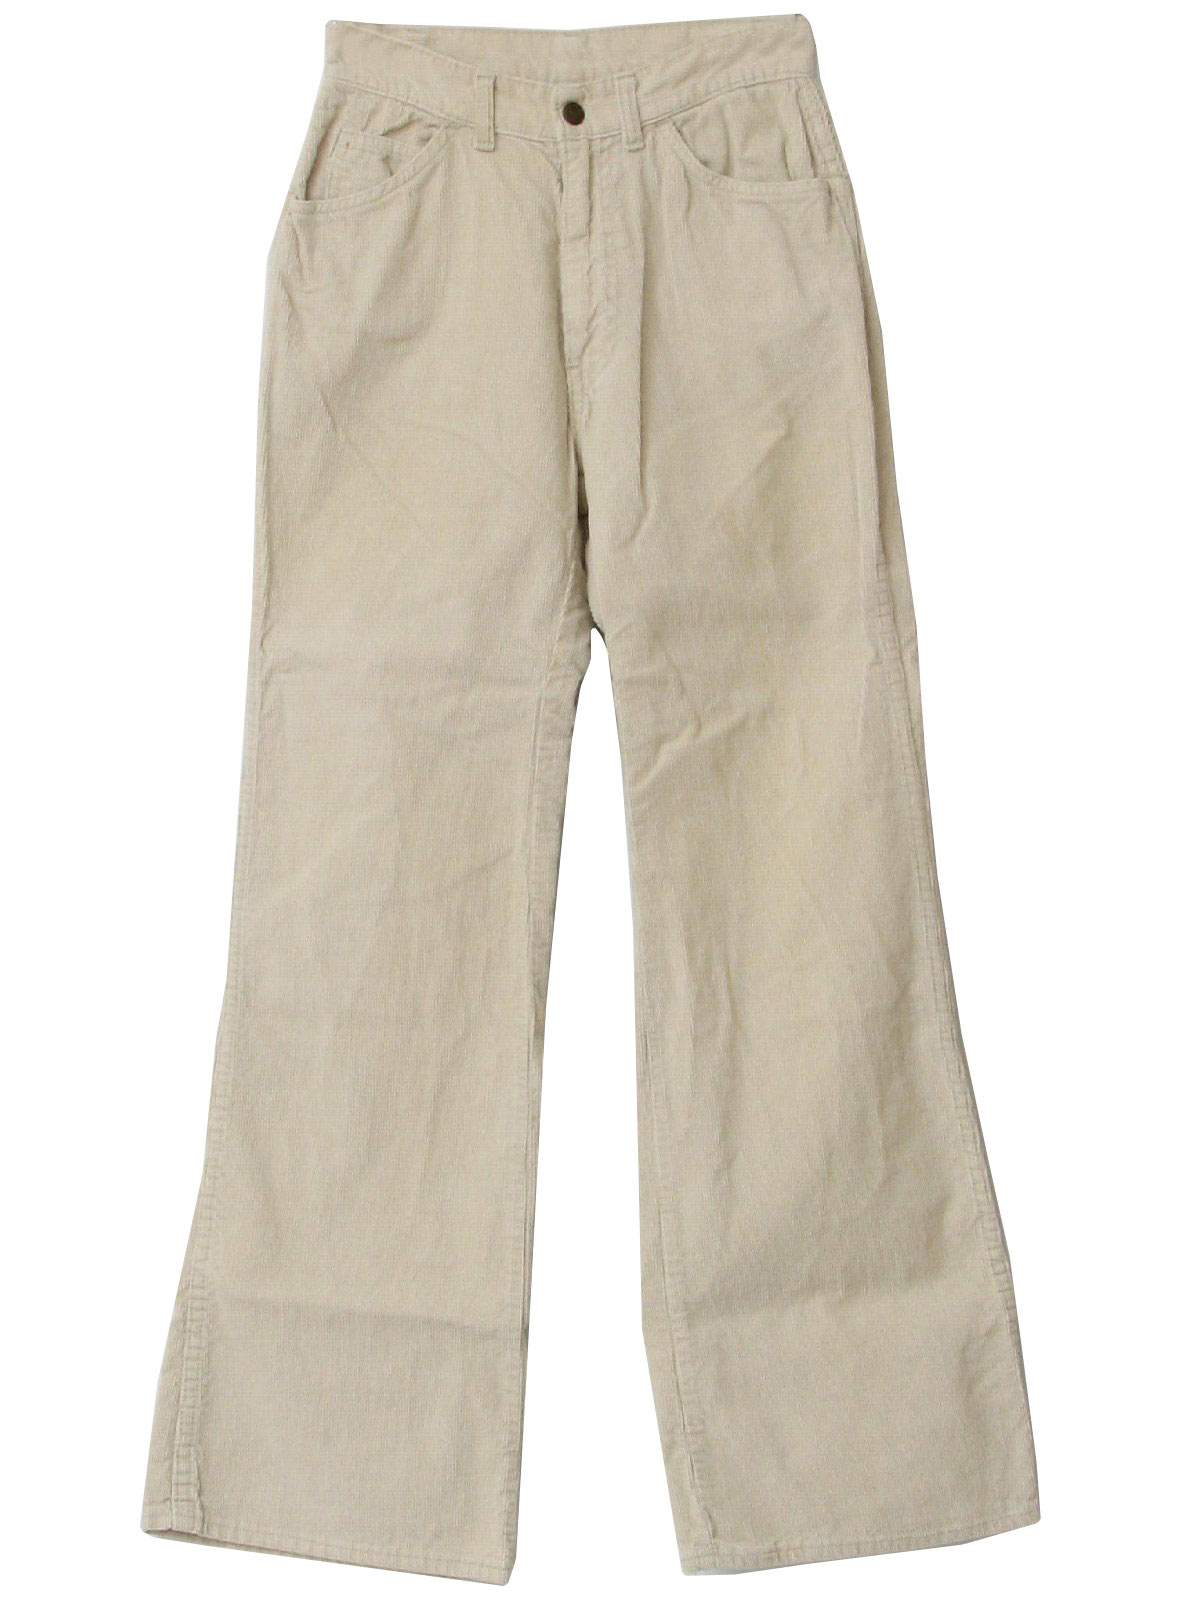 Retro 1970's Bellbottom Pants (Levis for Gals) : 70s -Levis for Gals ...